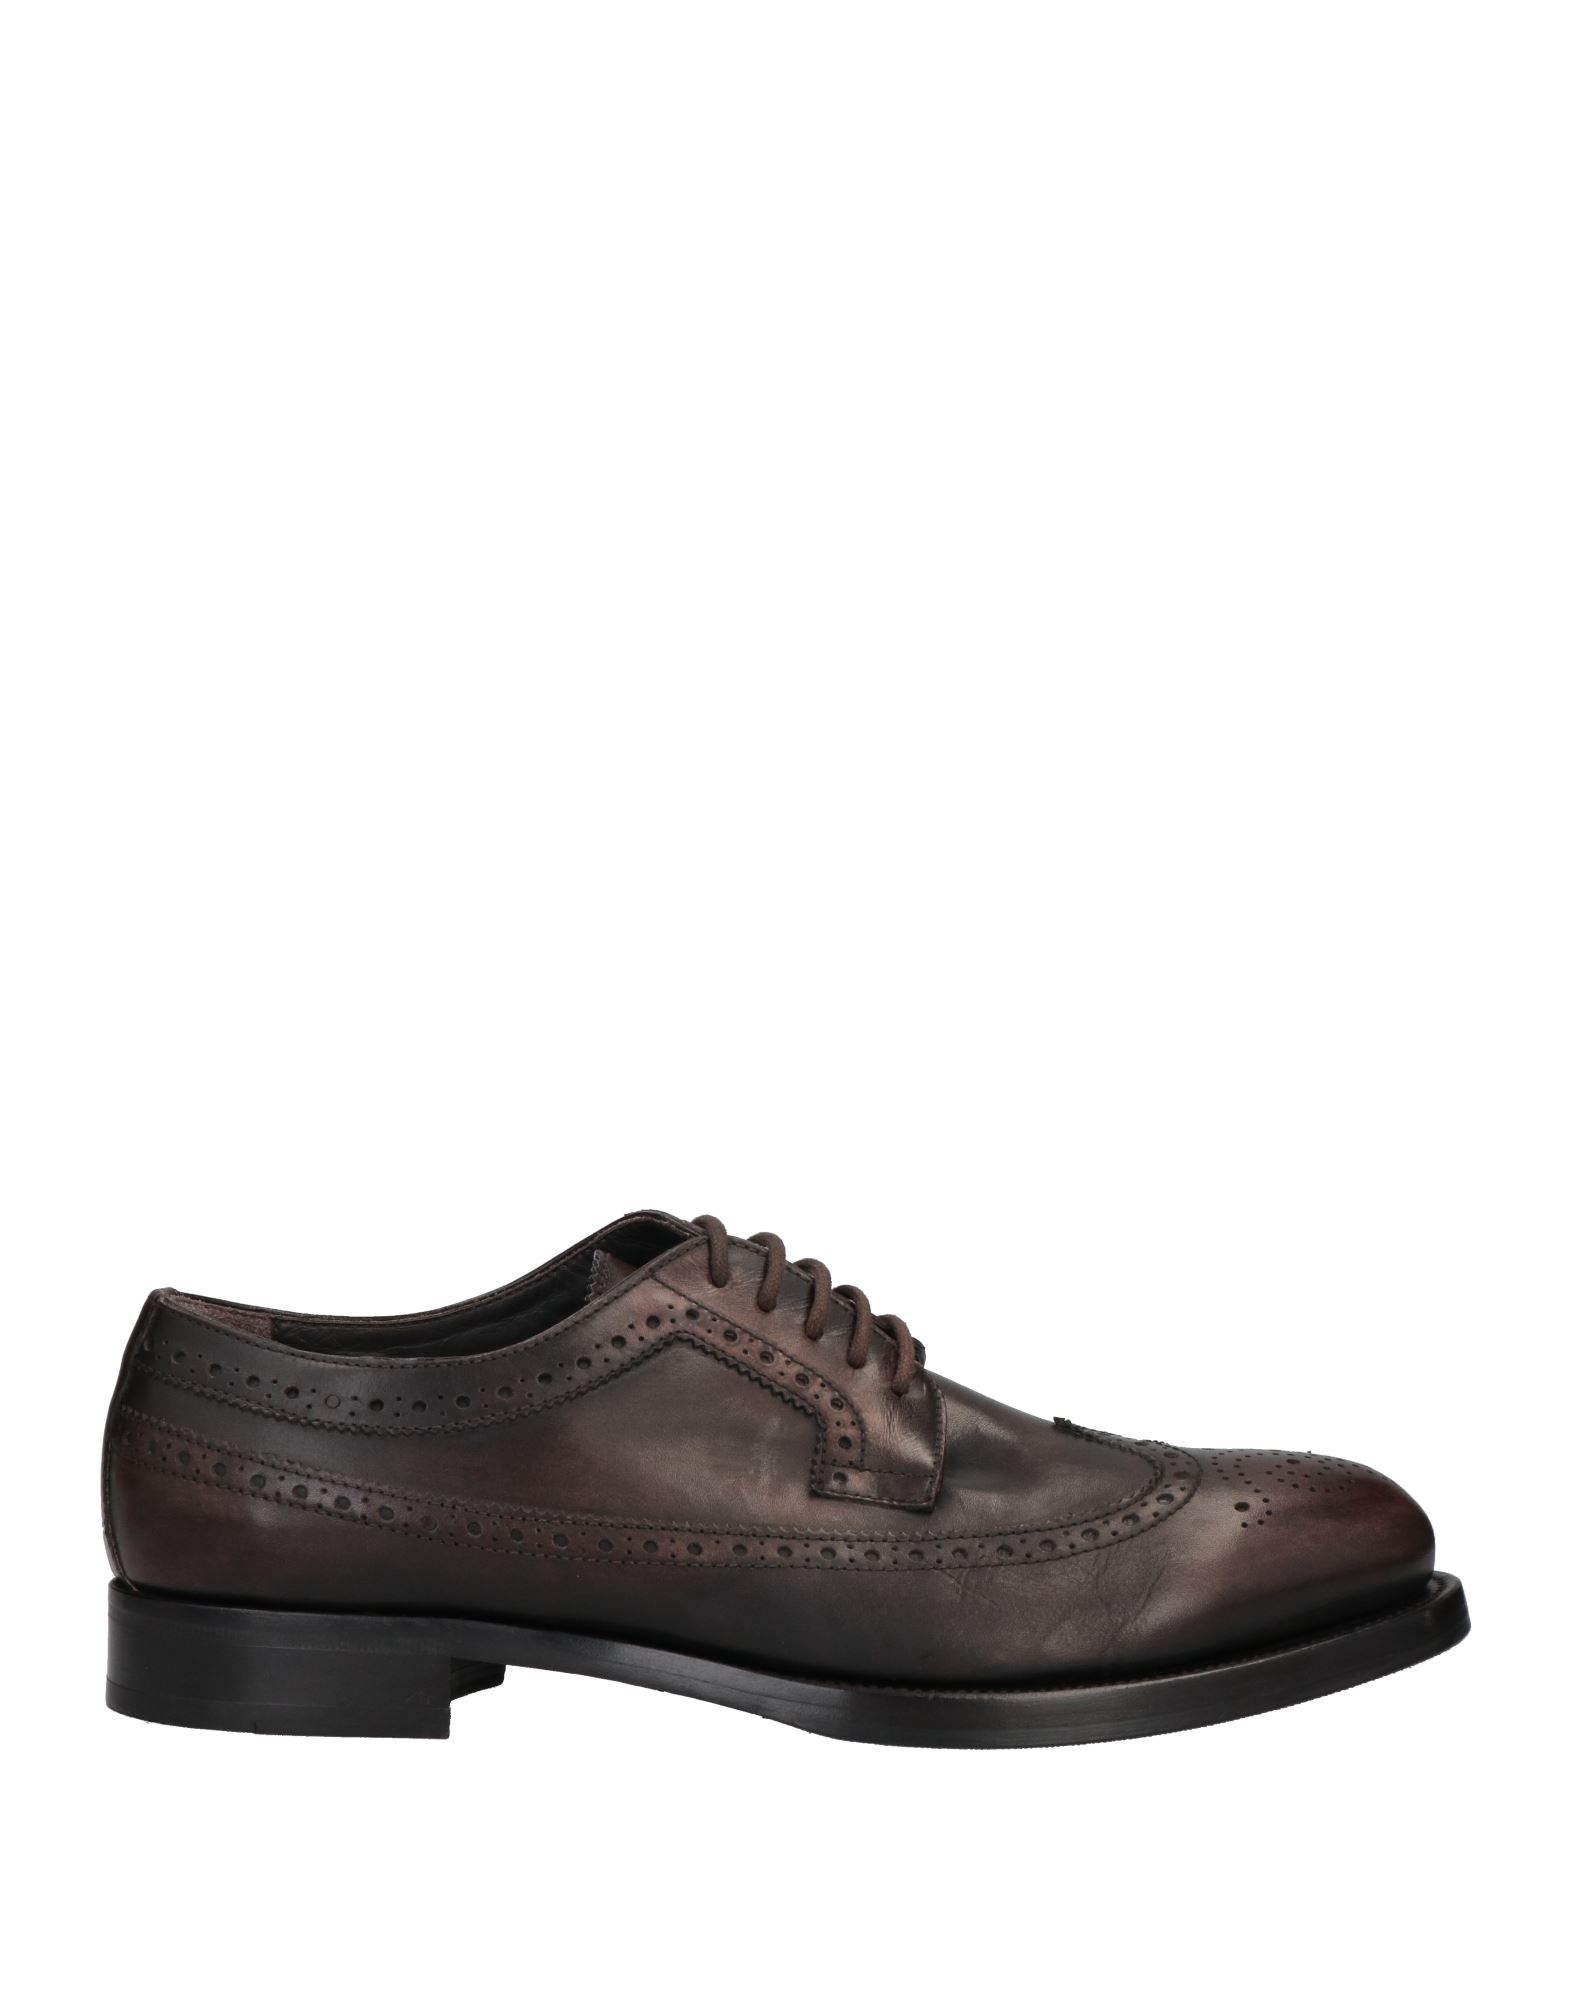 JEROLD WILTON Lace-up shoes